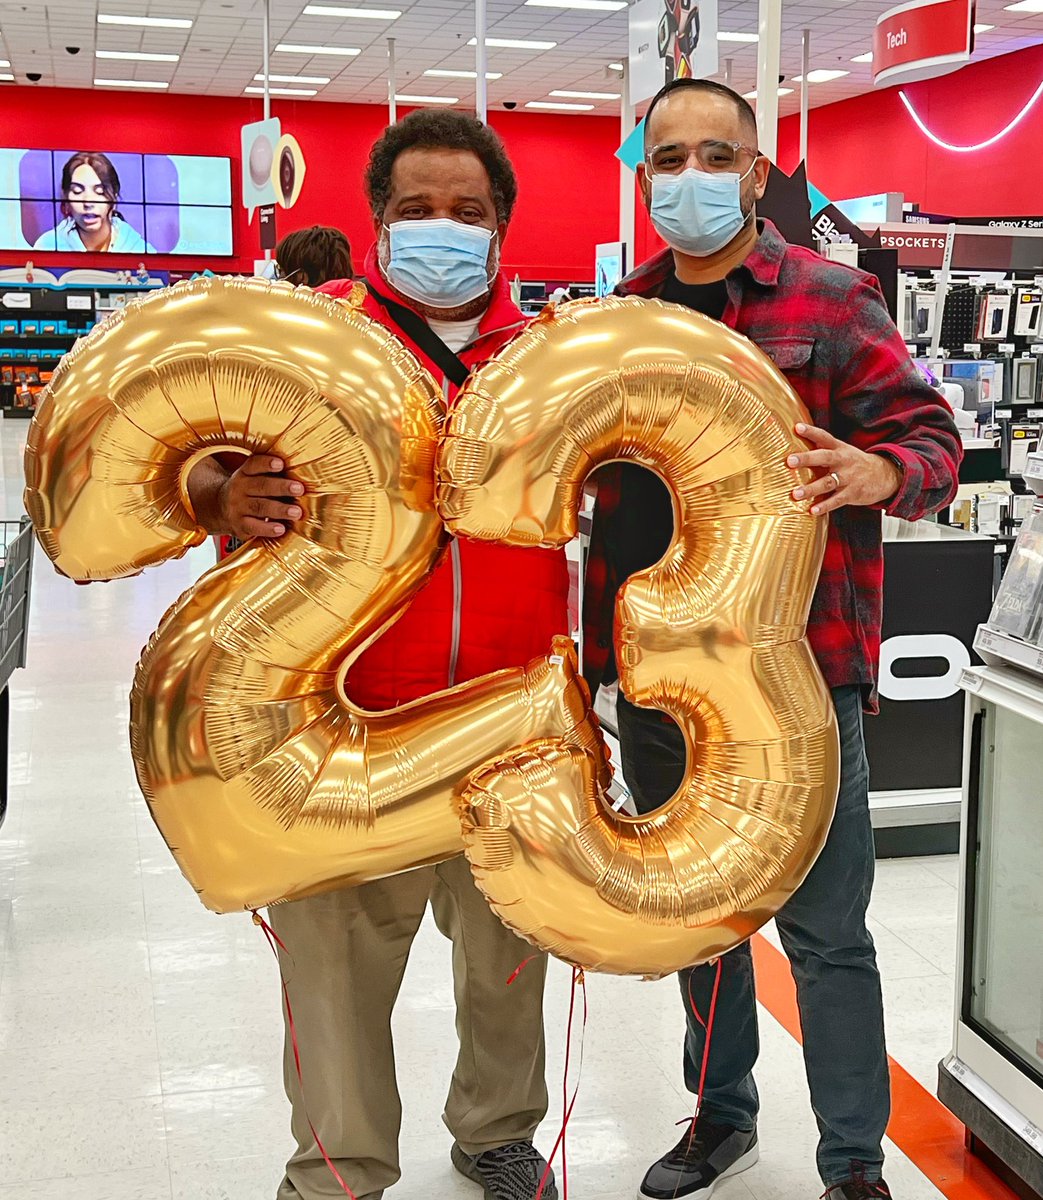 #23years ago we hired this #amazing leader right before the big day…. #BlackFriday. Congrats on your #goldenanniversary @latoyas20 . #WinningSeason #D311HOUtx @Target #G392AllStar 

@JaxBackes